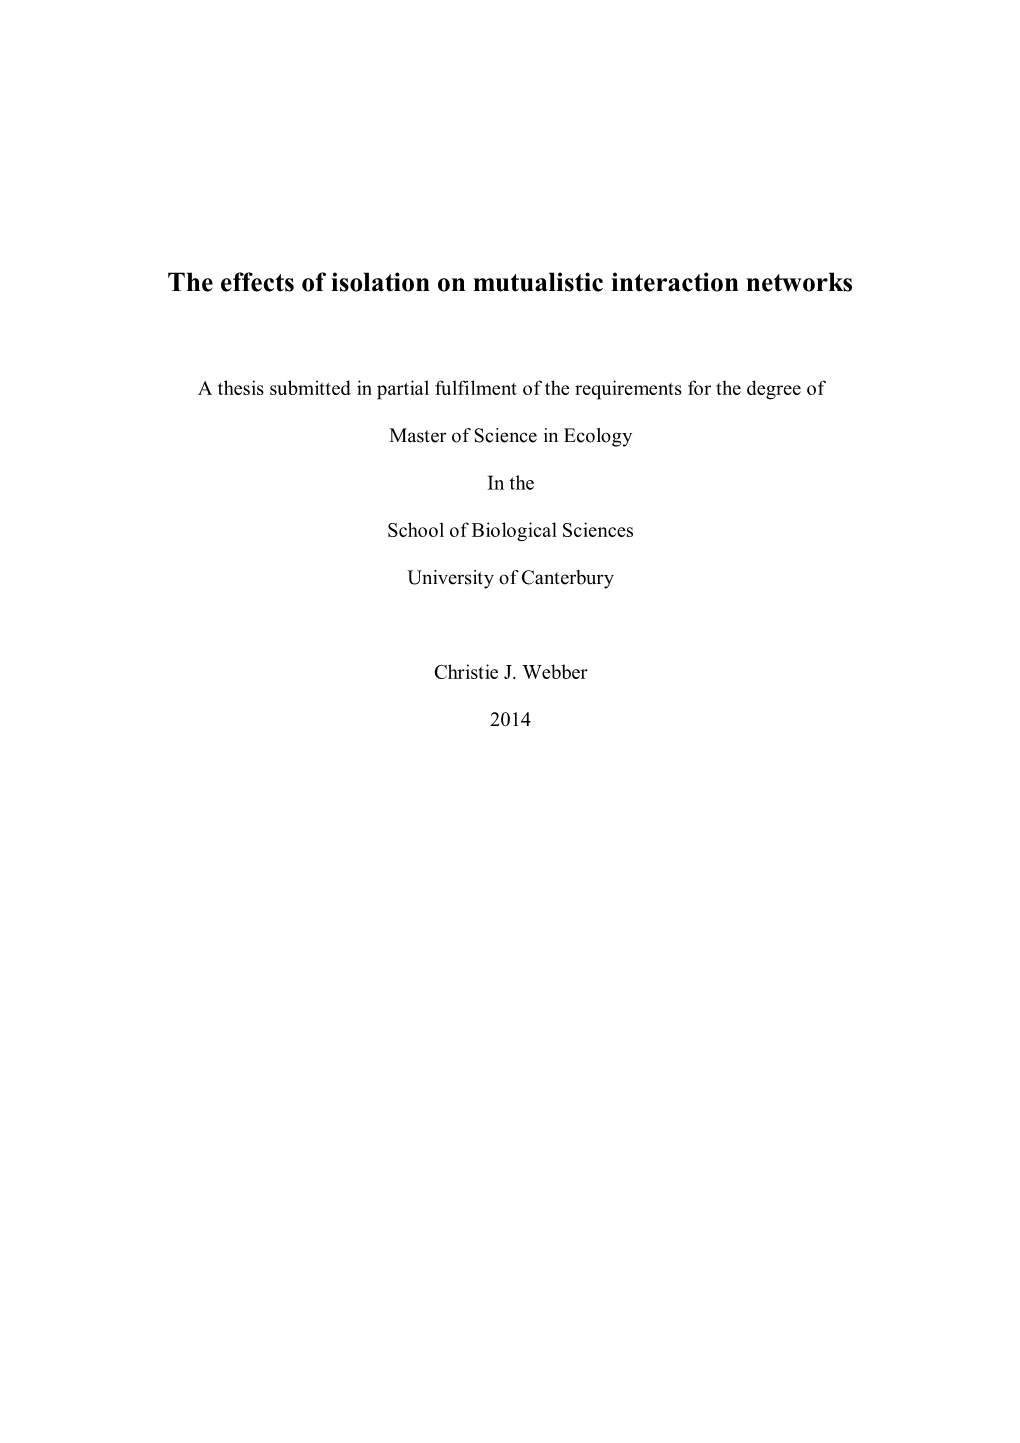 The Effects of Isolation on Mutualistic Interaction Networks